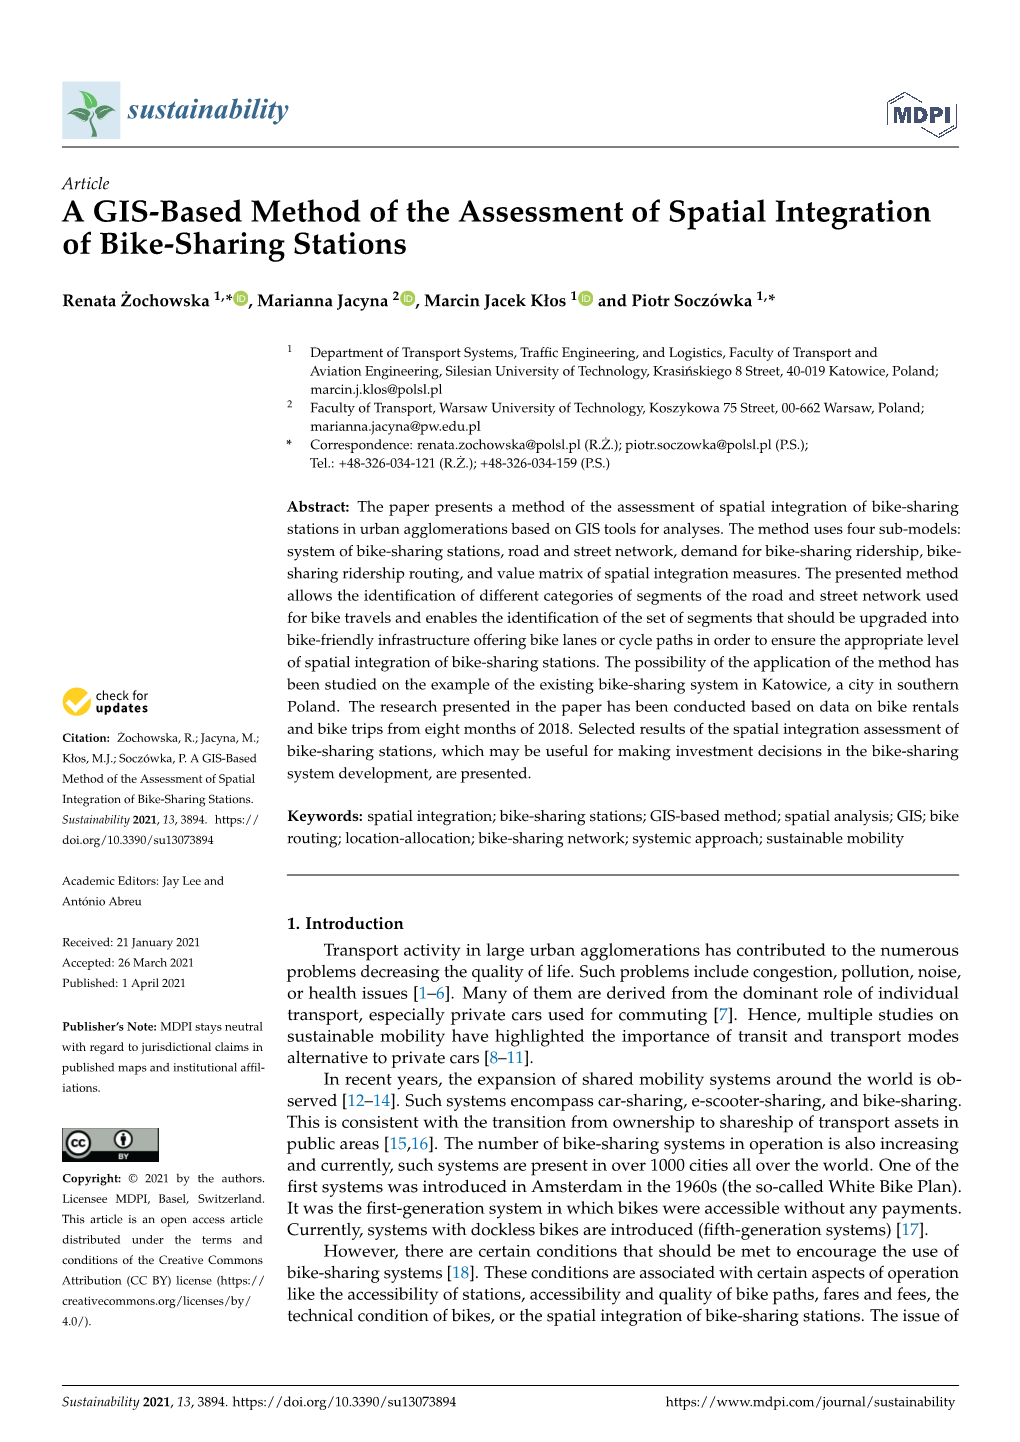 A GIS-Based Method of the Assessment of Spatial Integration of Bike-Sharing Stations